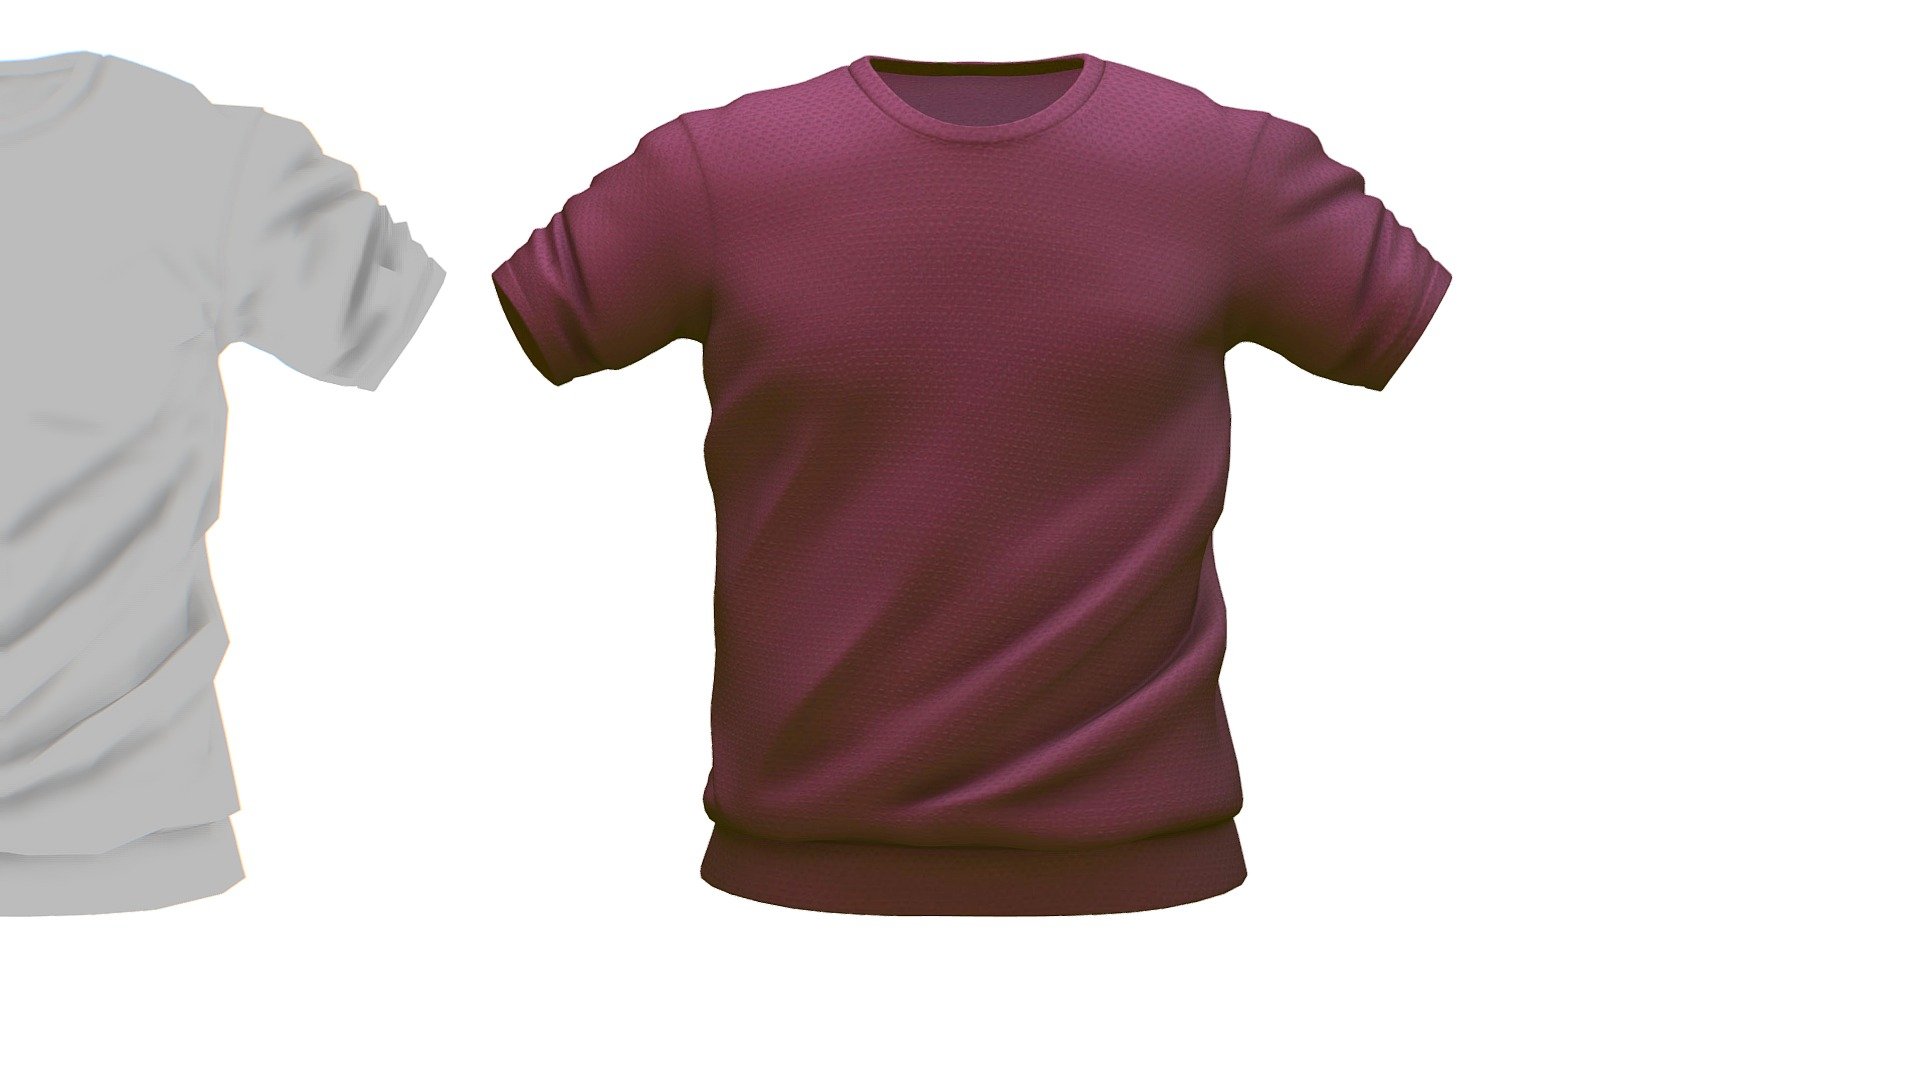 Cartoon High Poly Subdivision Maroon Sweater

No HDRI map, No Light, No material settings - only Diffuse/Color Map Texture (4048x4048) 

More information about the 3D model: please use the Sketchfab Model Inspector - Key (i) - Cartoon High Poly Subdivision Maroon Sweater - Buy Royalty Free 3D model by Oleg Shuldiakov (@olegshuldiakov) 3d model